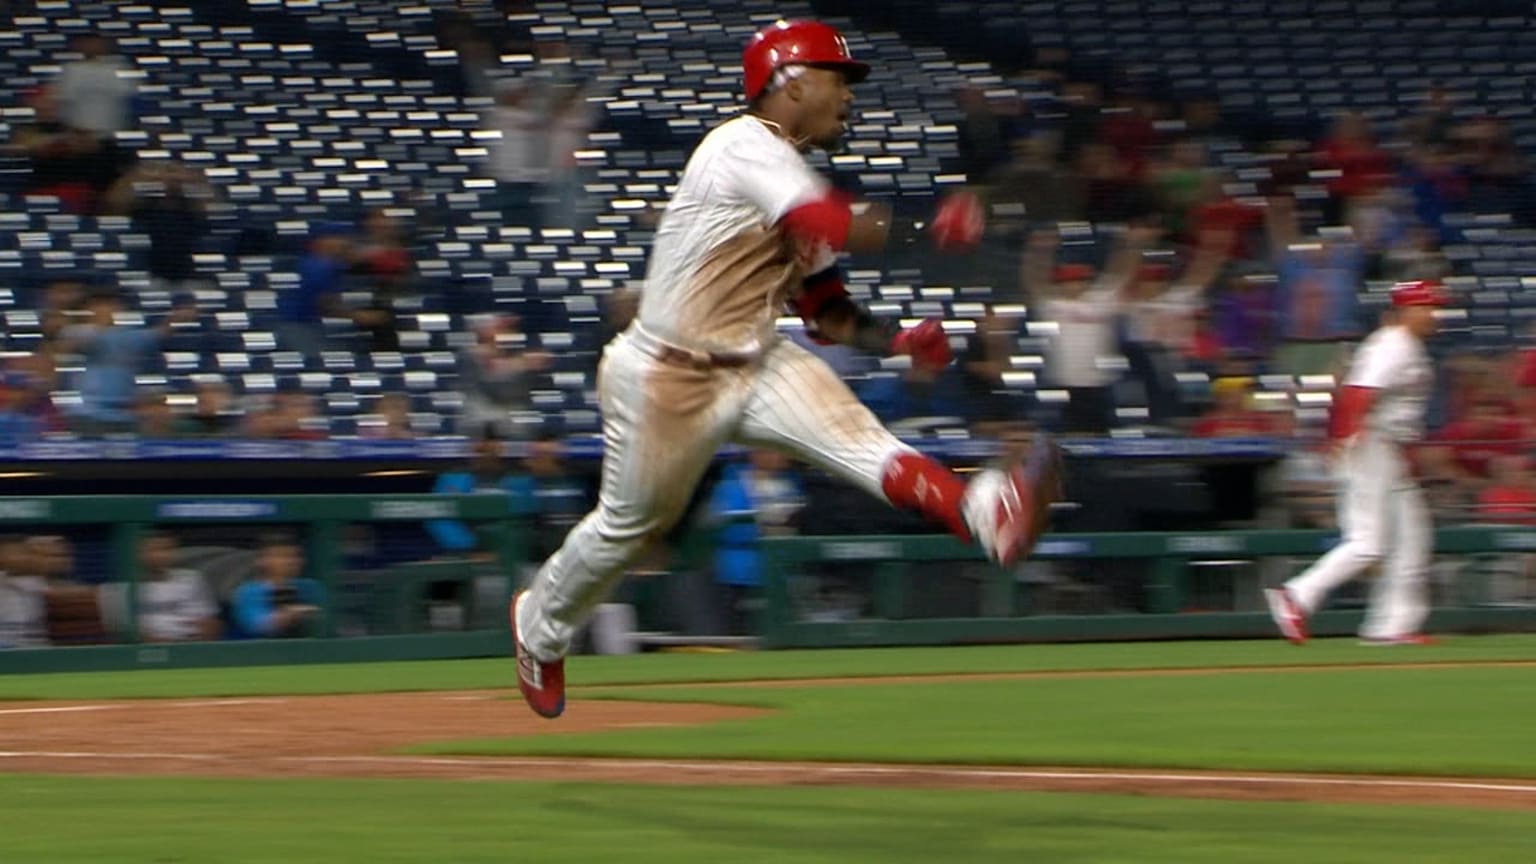 Segura's hit helps Phils walk off with 10-inning opening win vs Braves